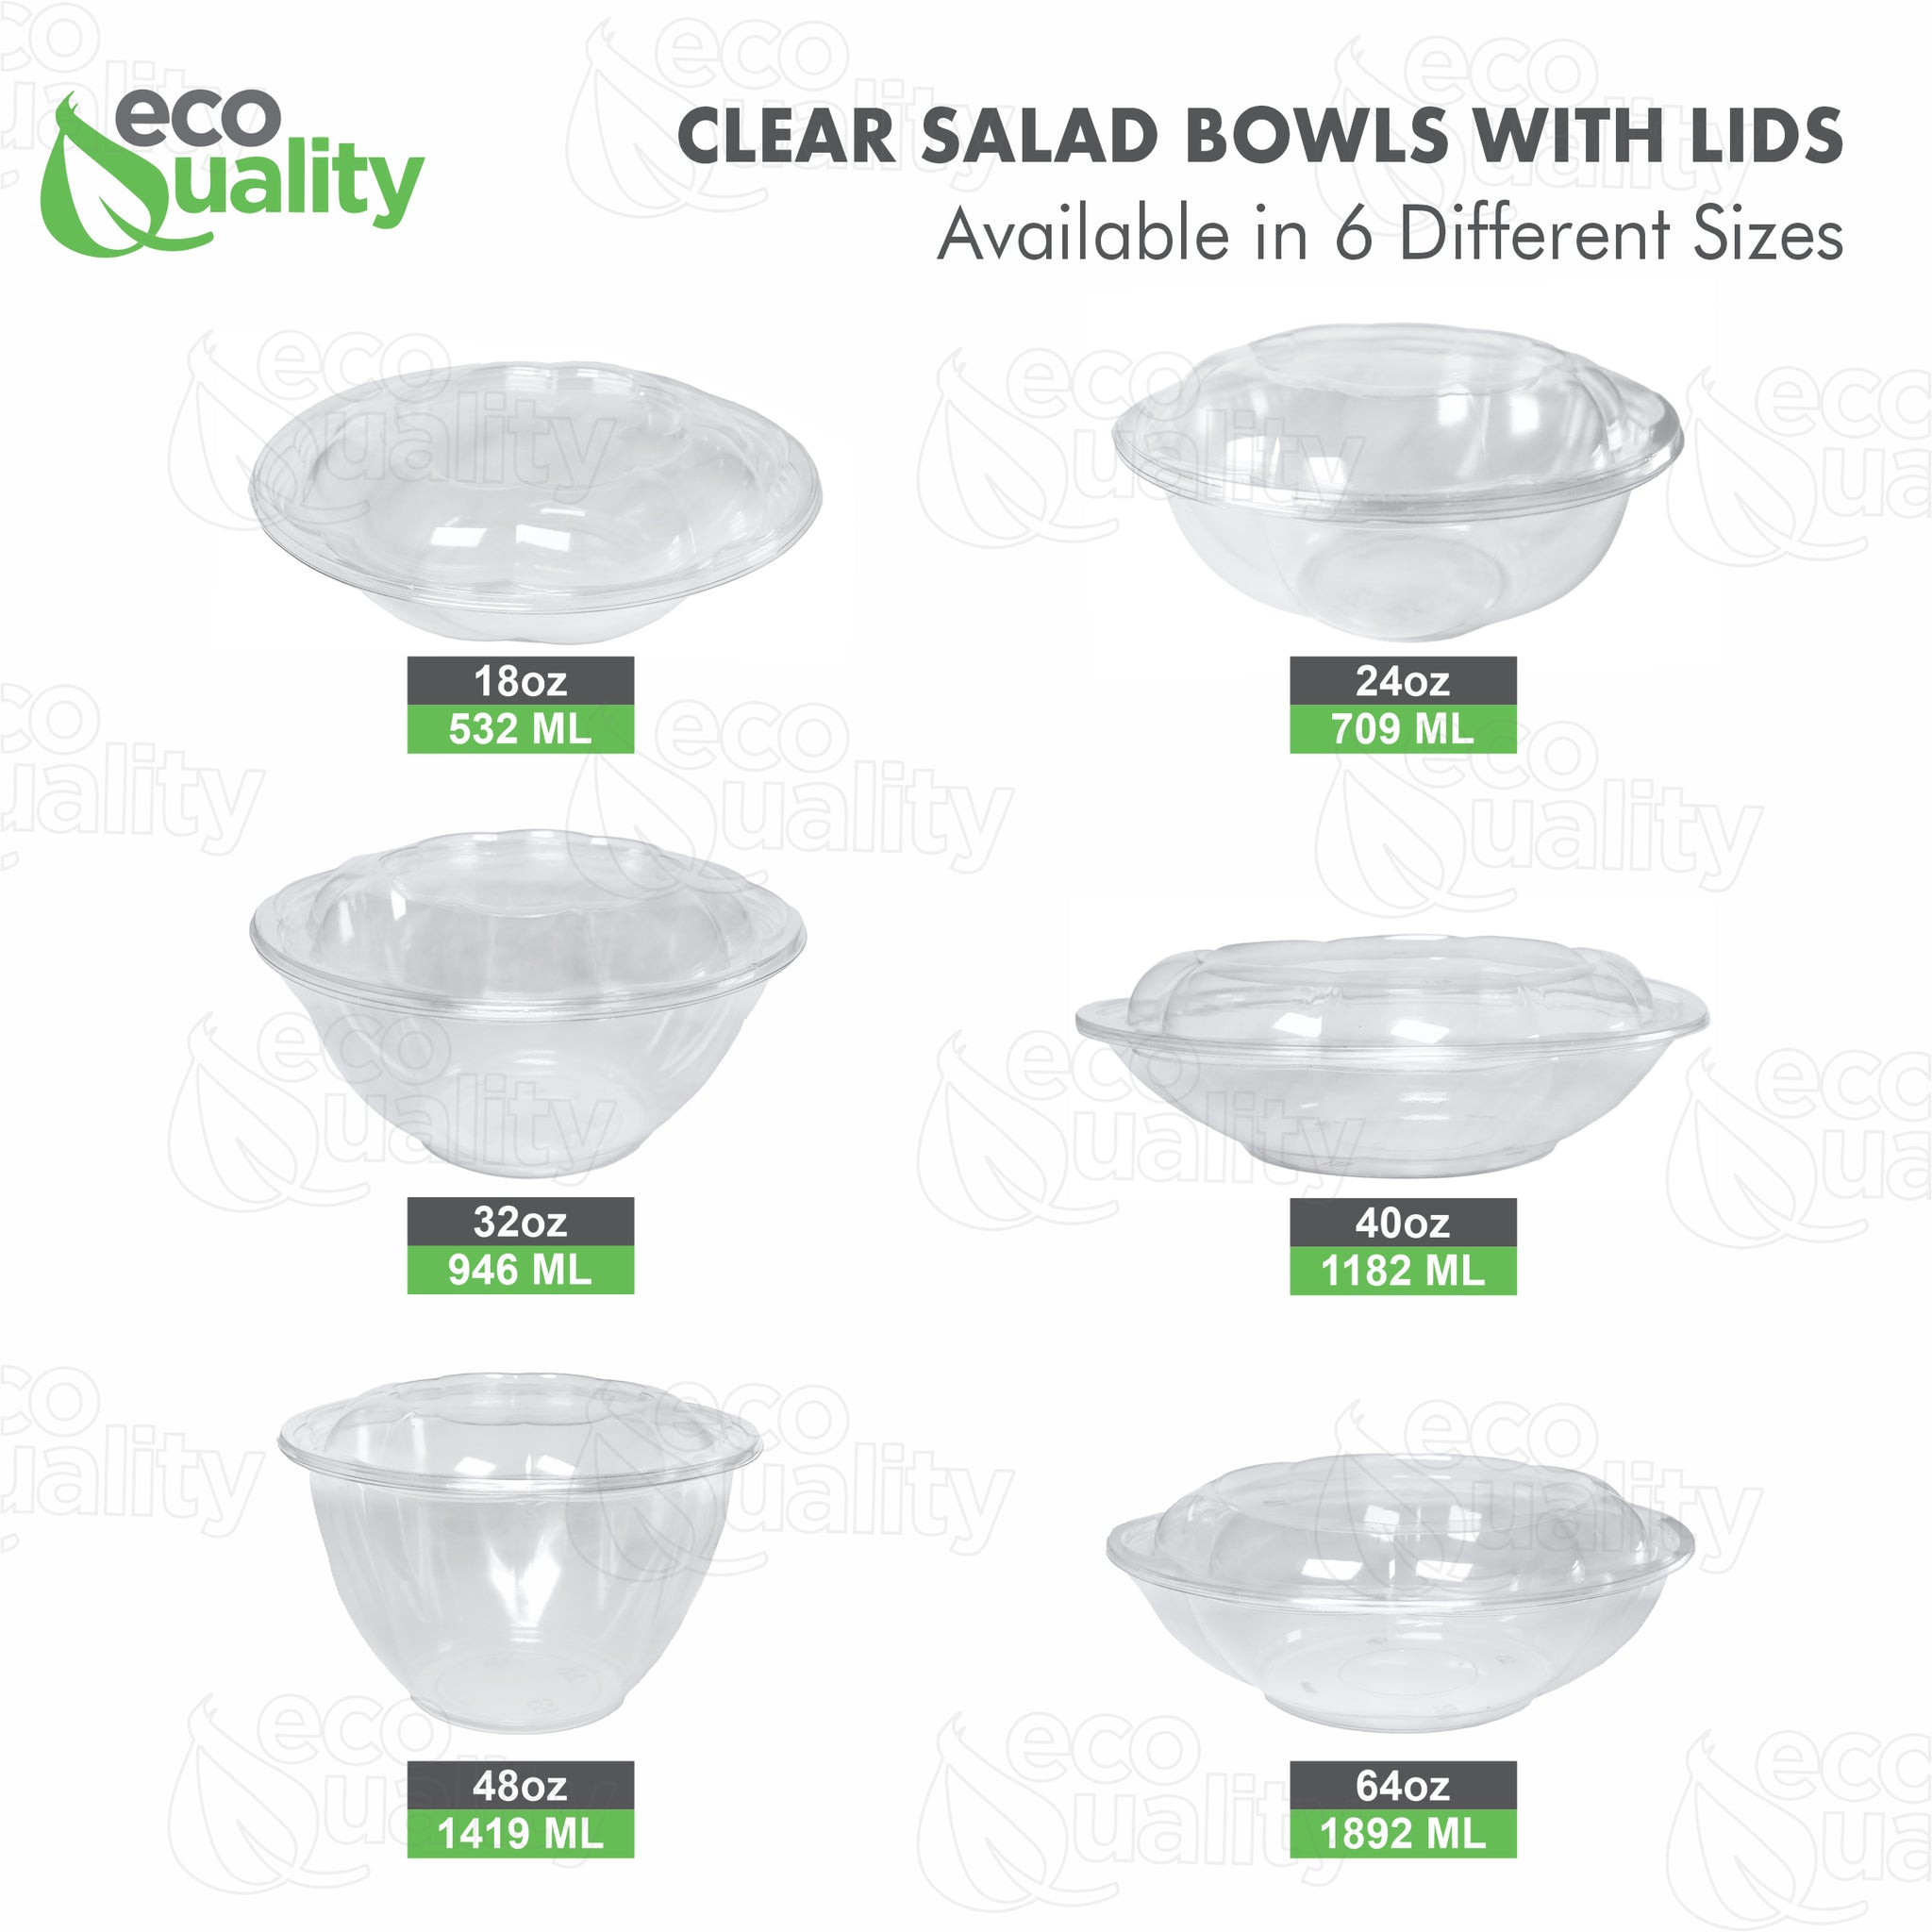 cold pasta salad bowls with lid clear plastic lunch bowl pet plastic deli salad supplies lunch dinner breakfast bowl to go takeout delivery packaging bowls rose bowl caterer catering events packaging solutions 18 ounces 18oz 24oz 24 ounces 32oz 32 ounces 48 ounces 48 oz 40 oz 40 ounces 64oz 64 ounces